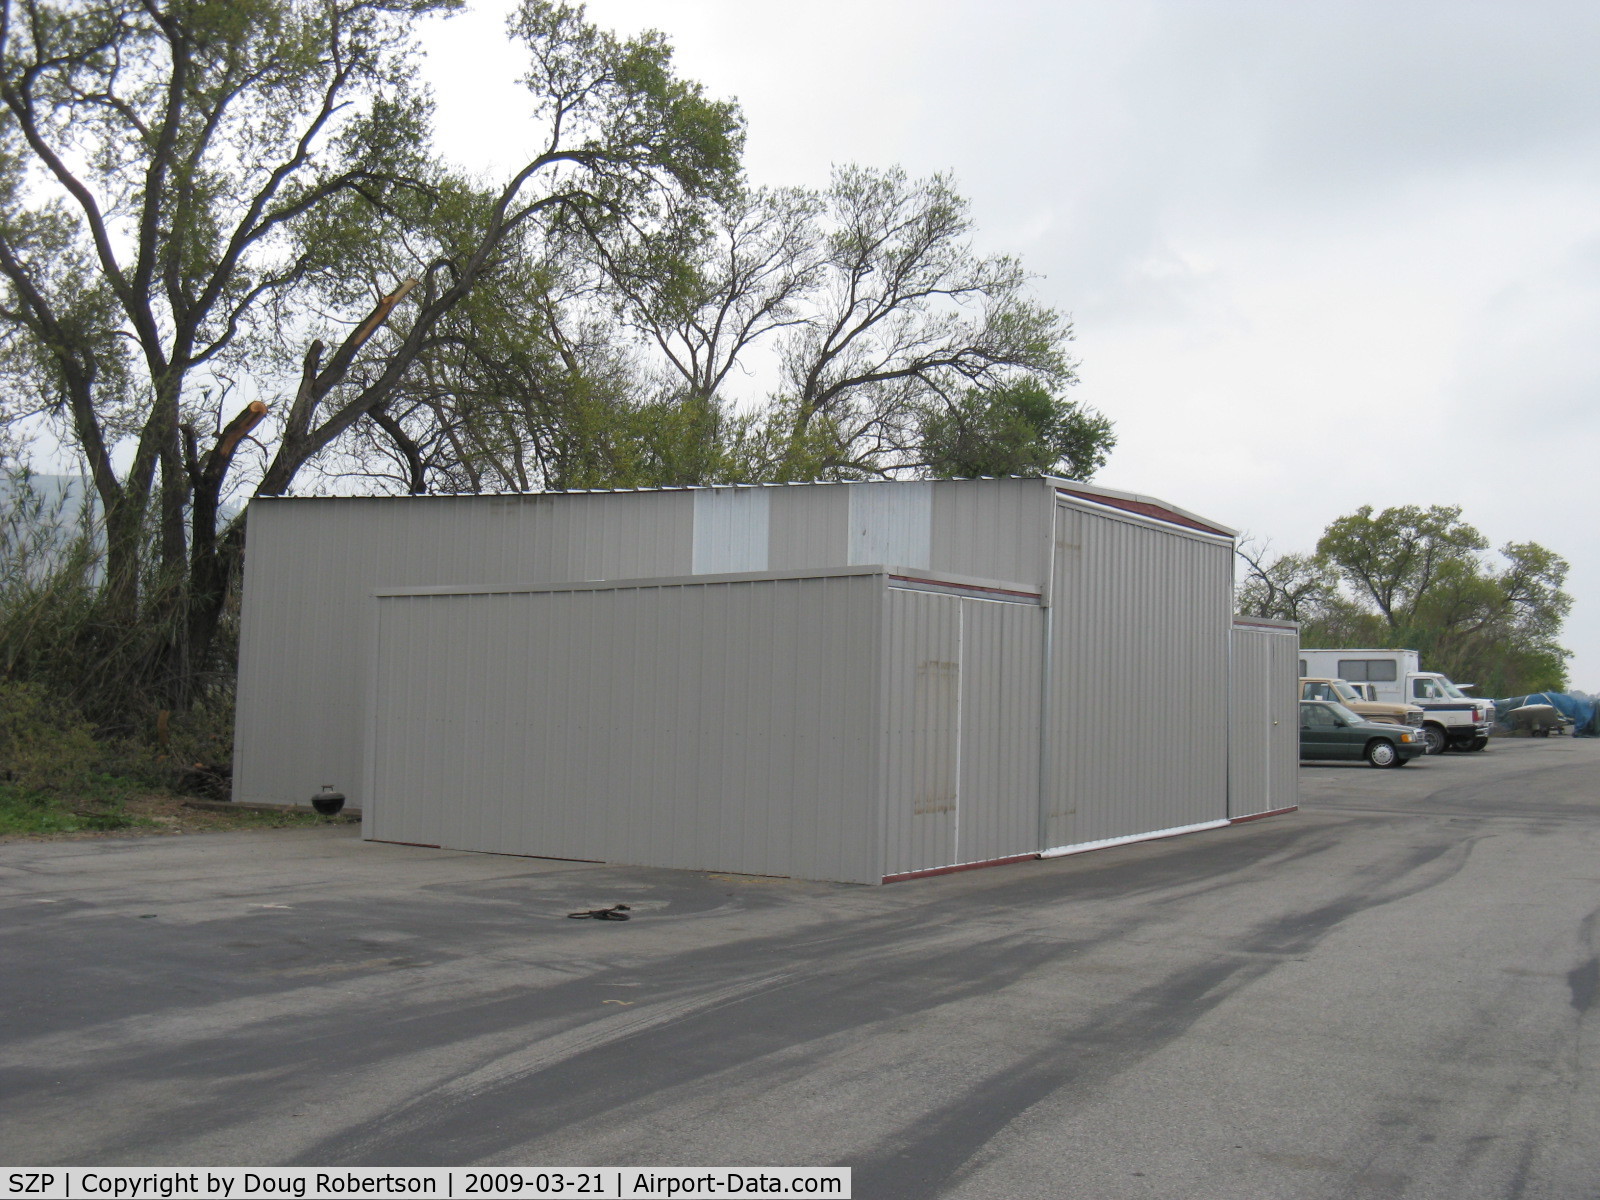 Santa Paula Airport (SZP) - New trailer/hangar with hitch-Completed.